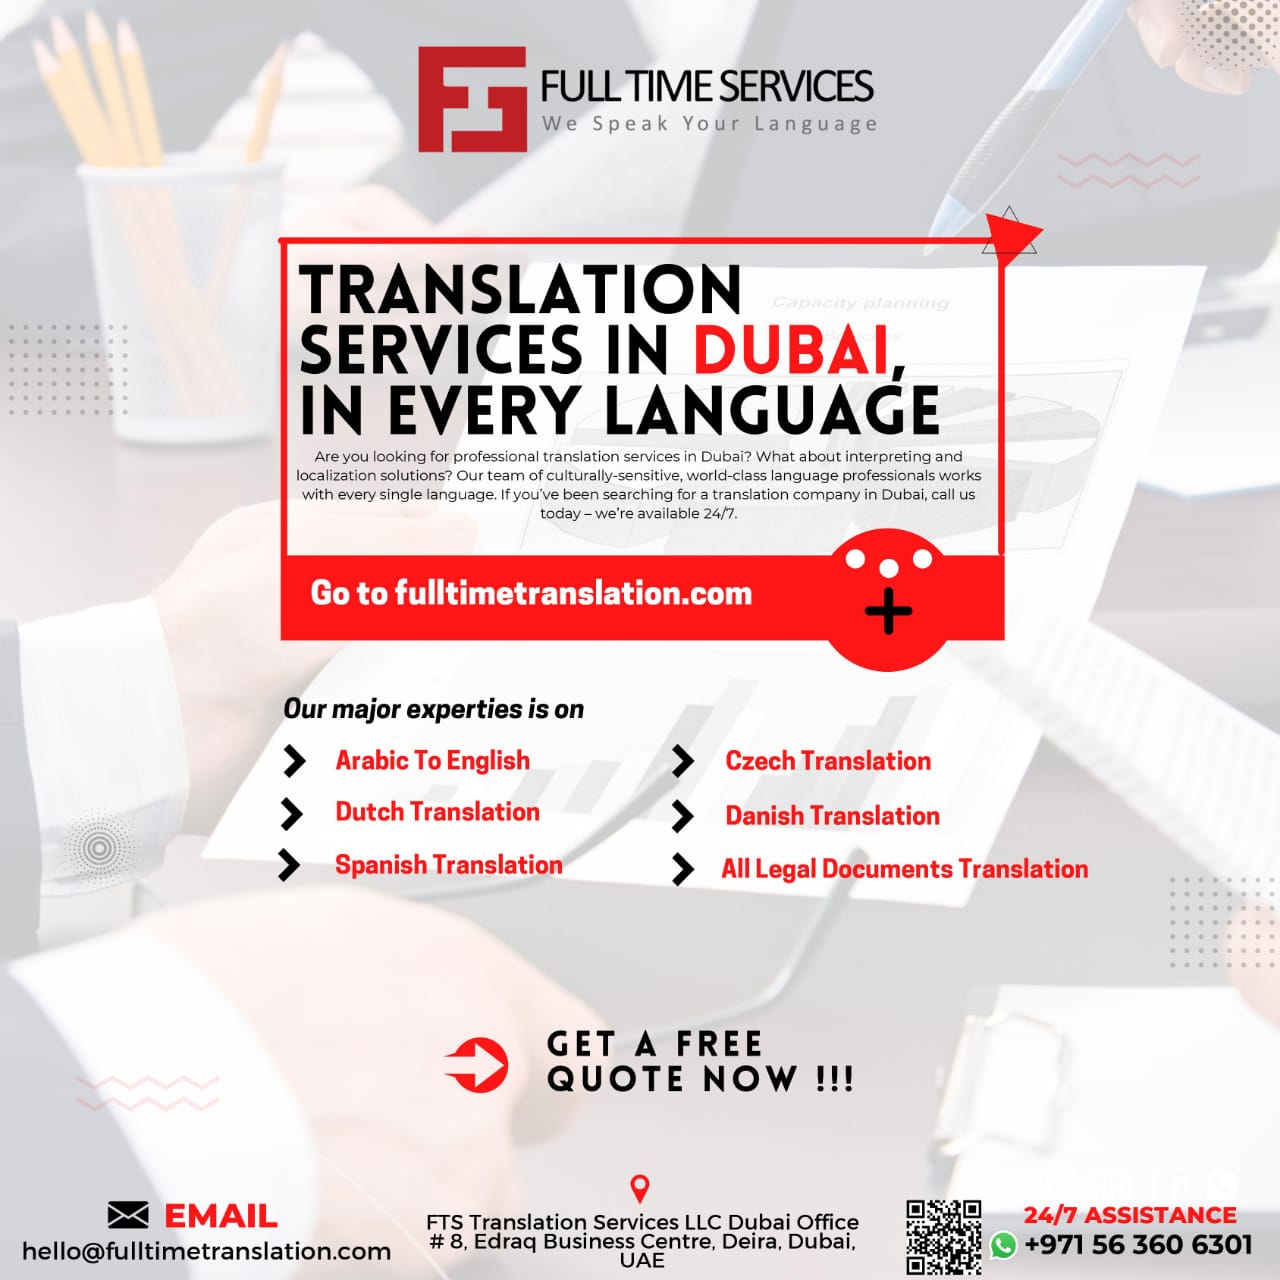 Turn your Arabic legal documents into flawless English versions with our expert translators.